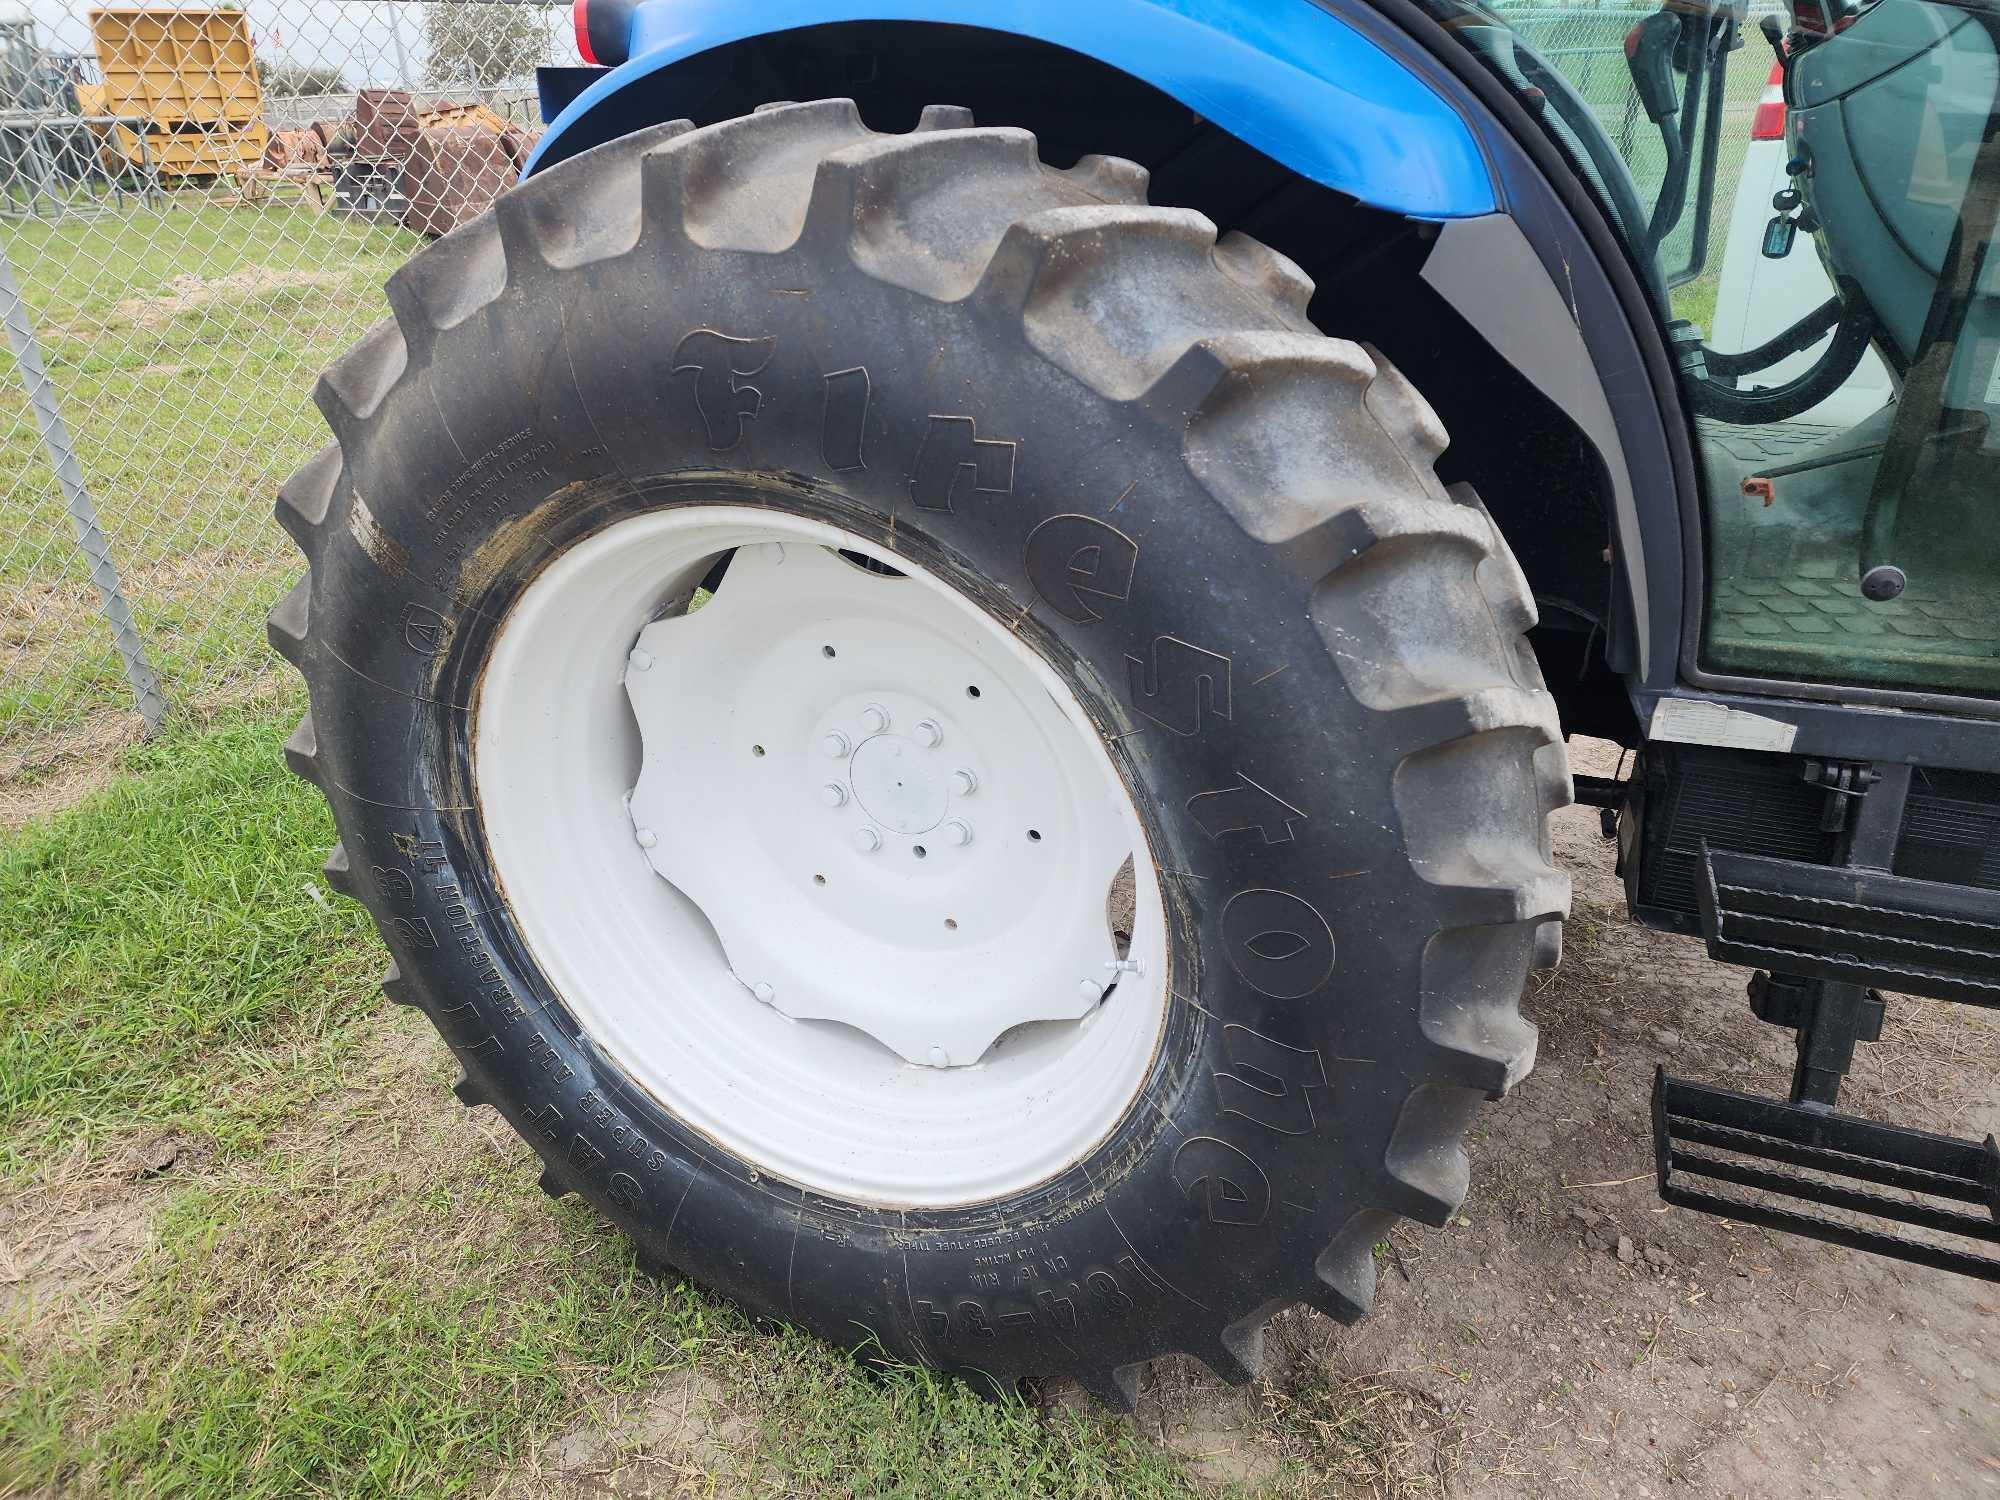 New Holland TD5050 Tractor